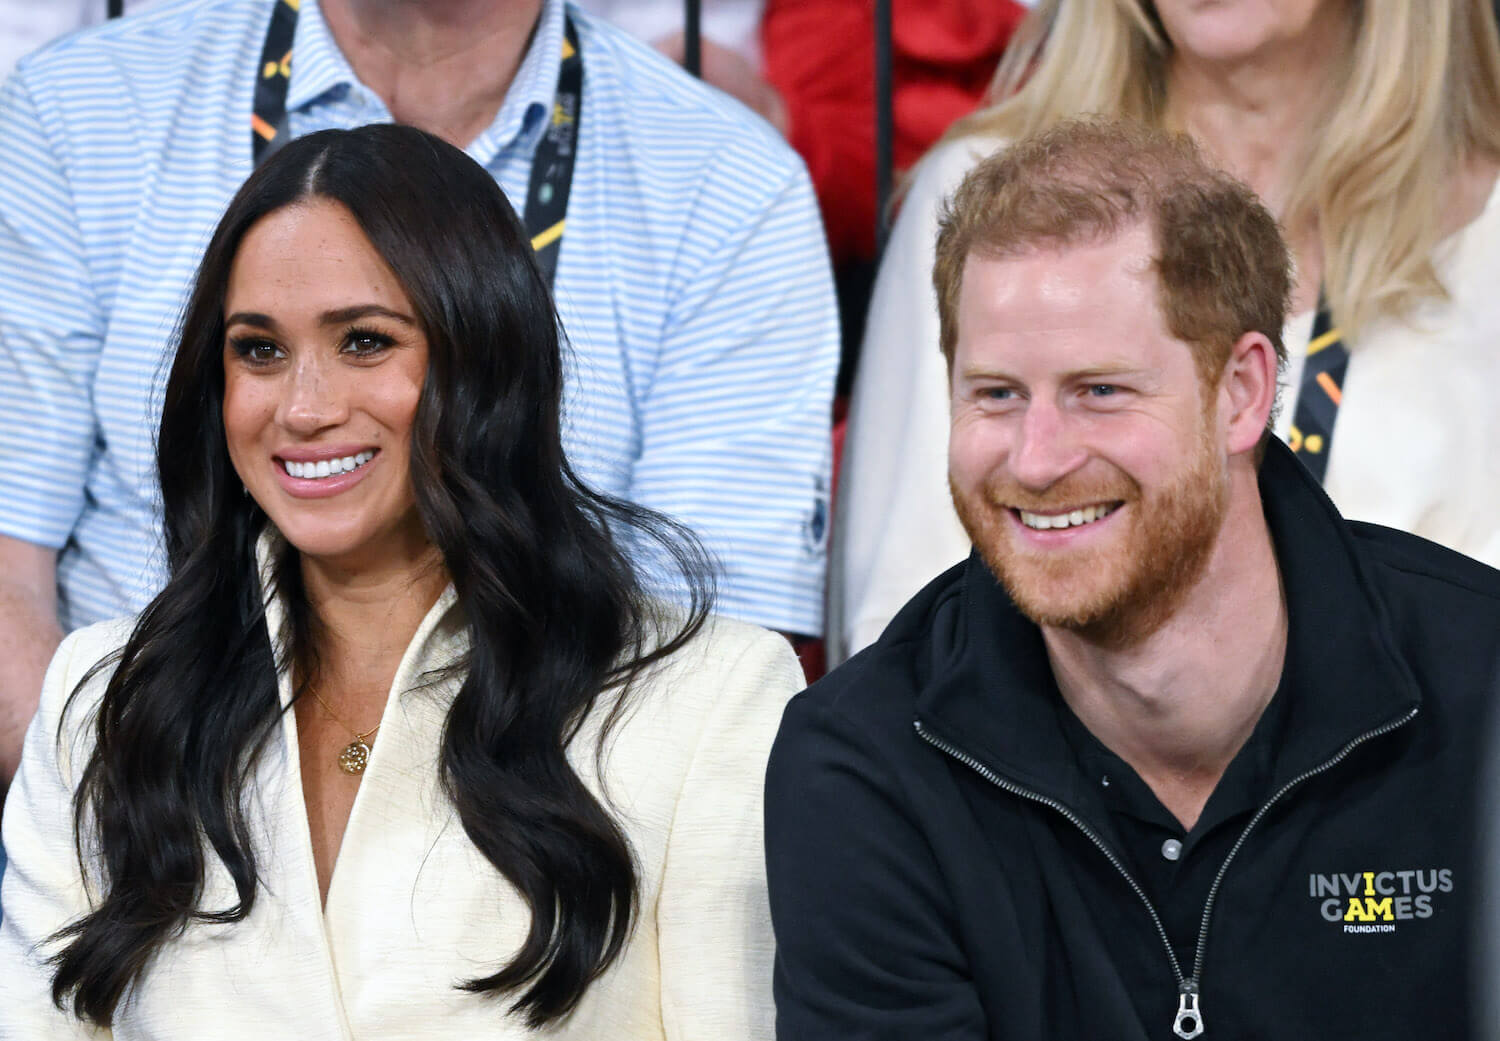 Meghan Markle wears a white top and smiles next to Prince Harry smiling while wearing a dark zip up shirt